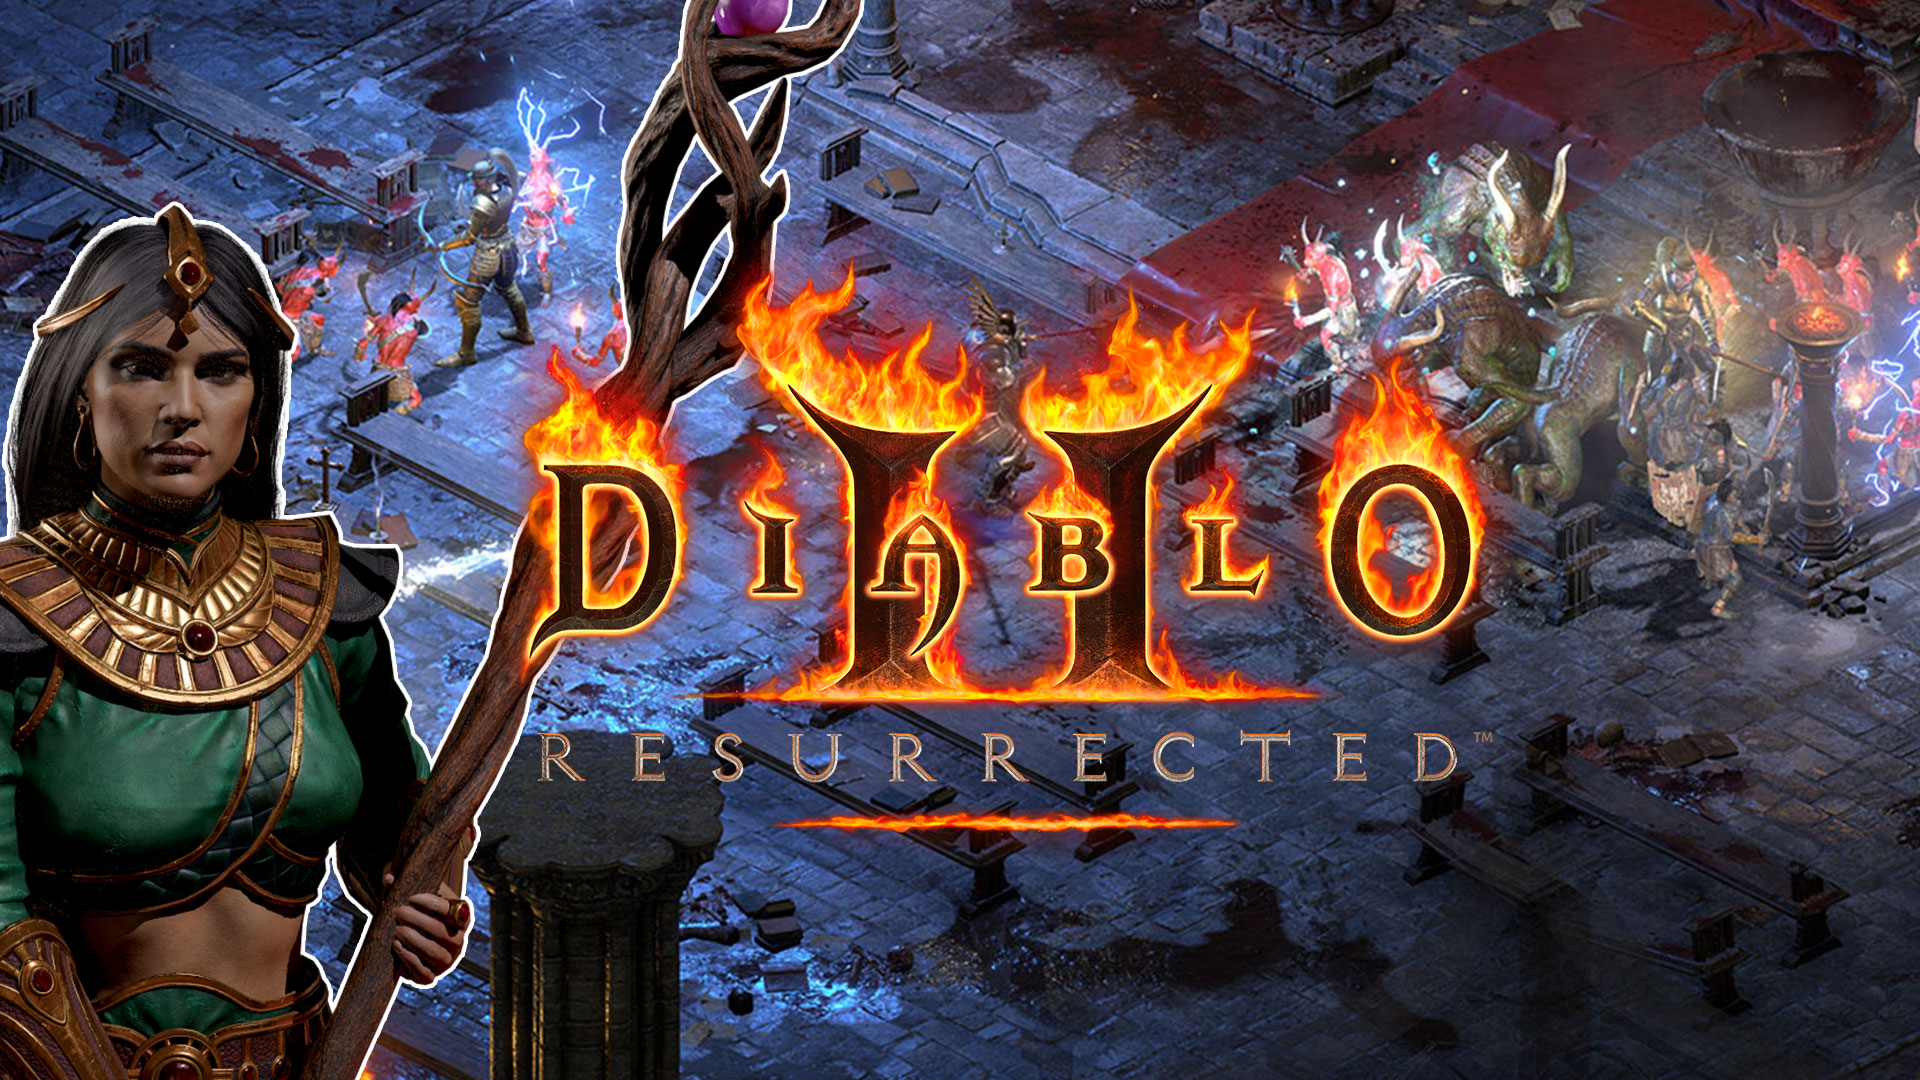 It was a long wait for the eagerly anticipated Diablo III, Online Event